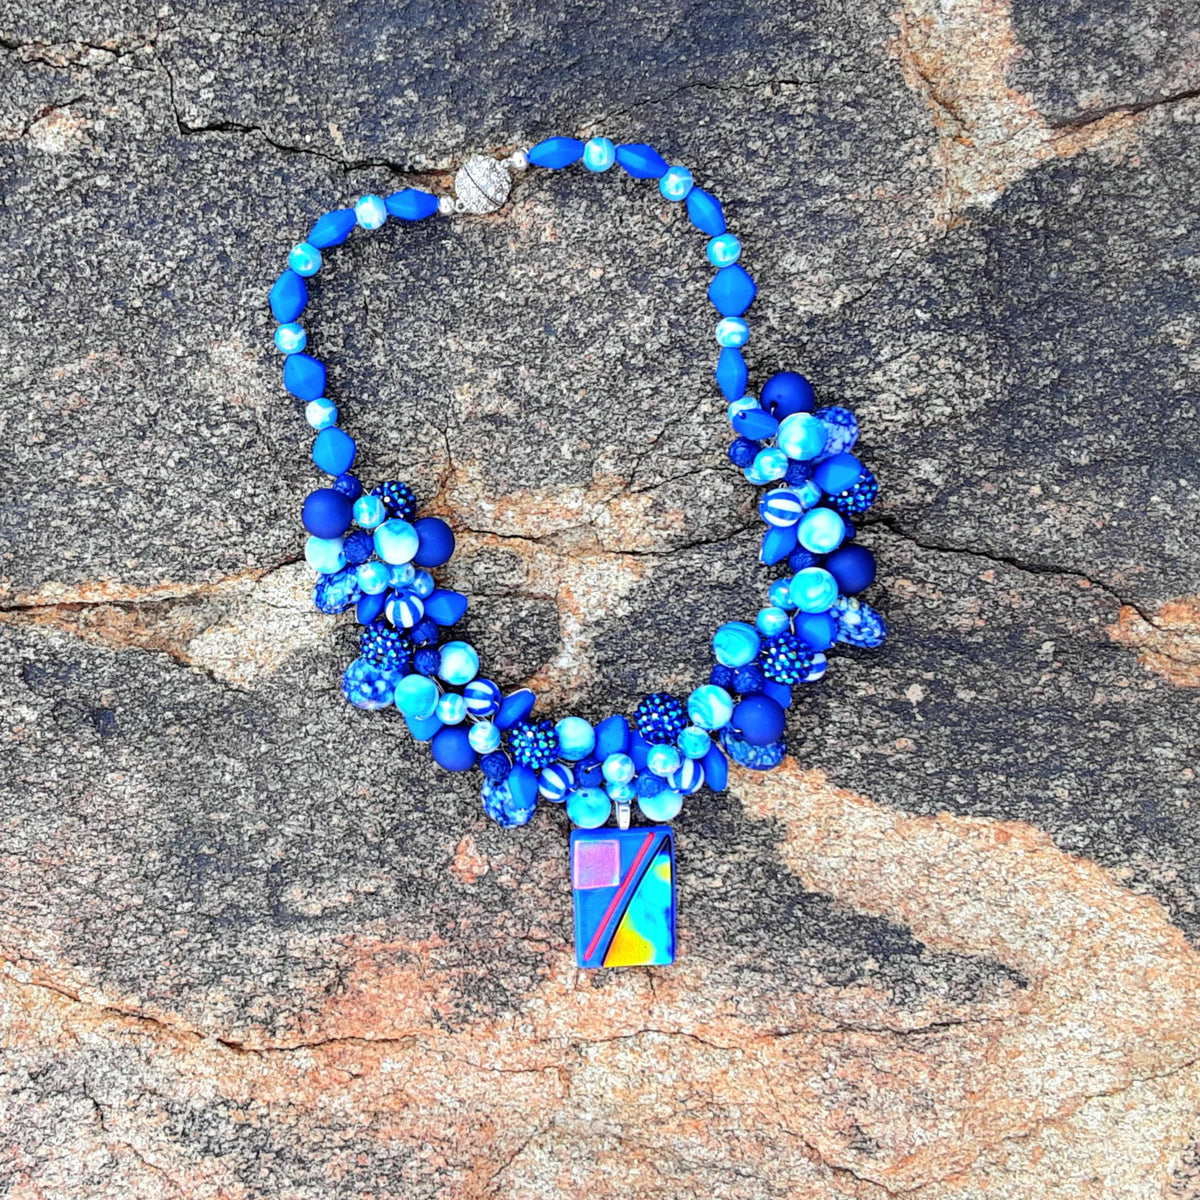 Beaded Multi Strand Statement Necklace with Fused Glass Pendant - Colorful Chunky Gift for Her - Mother of the Bride Bib